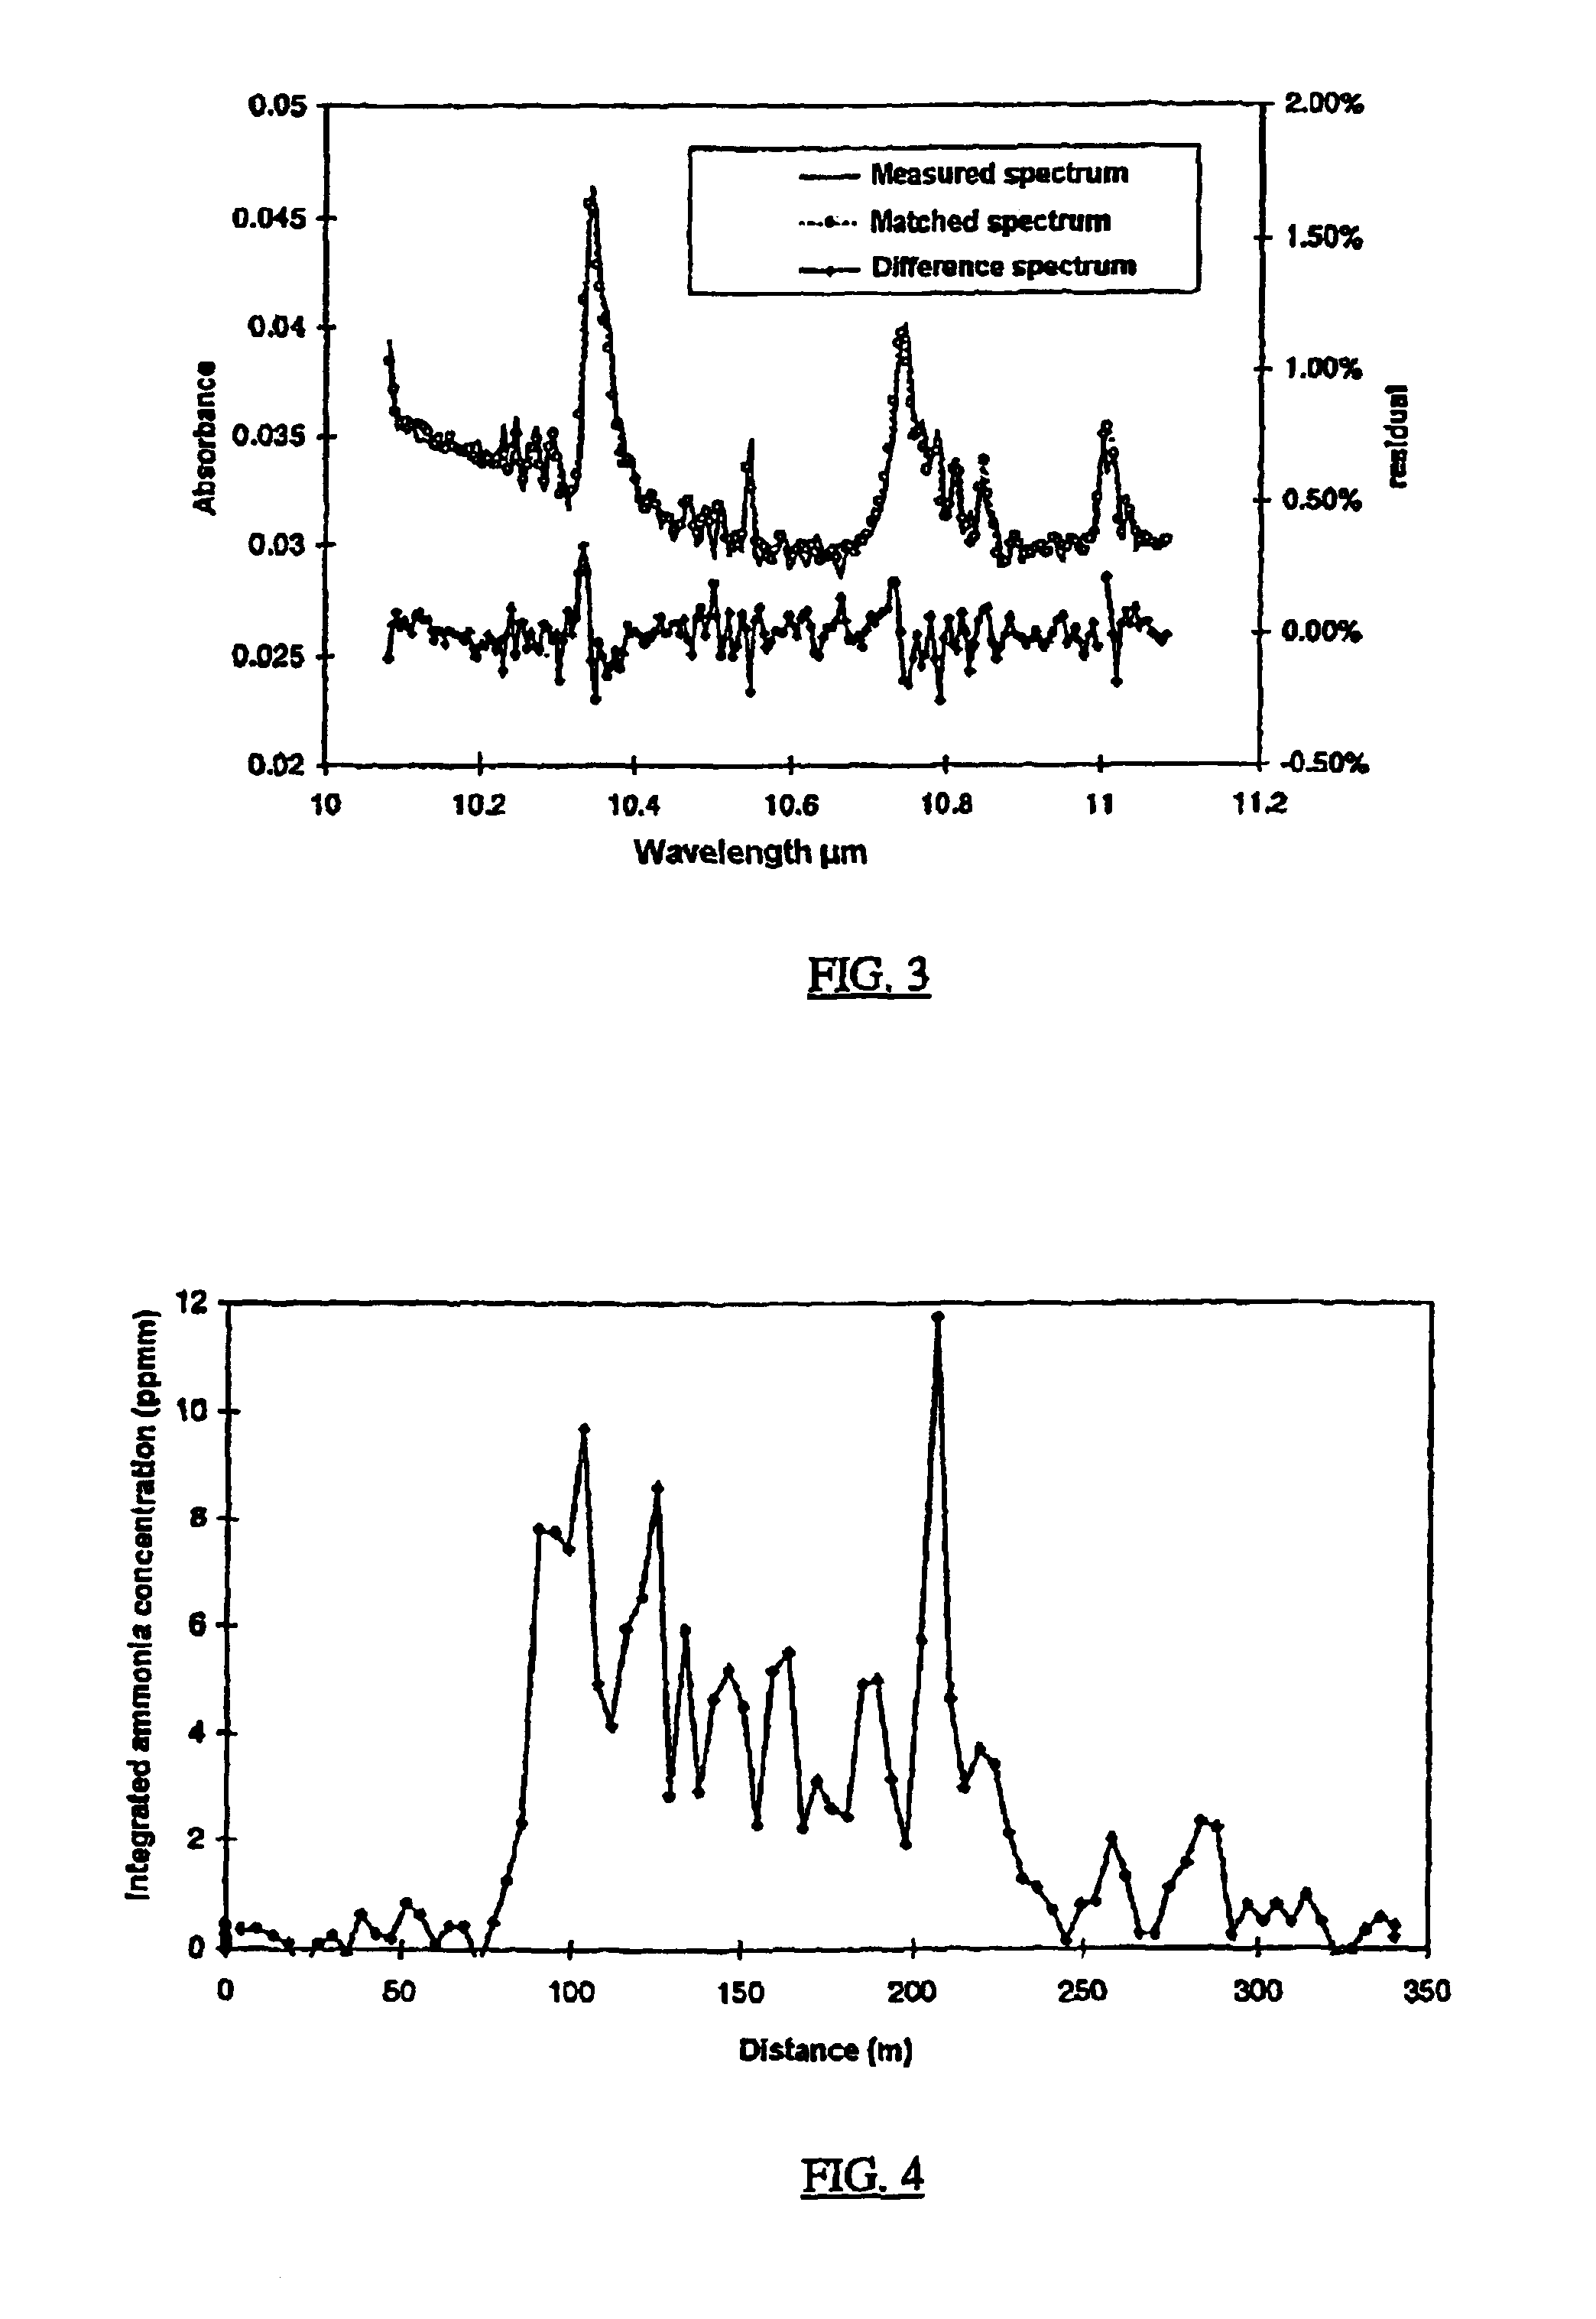 Method for measuring of gaseous emissions and/or flux